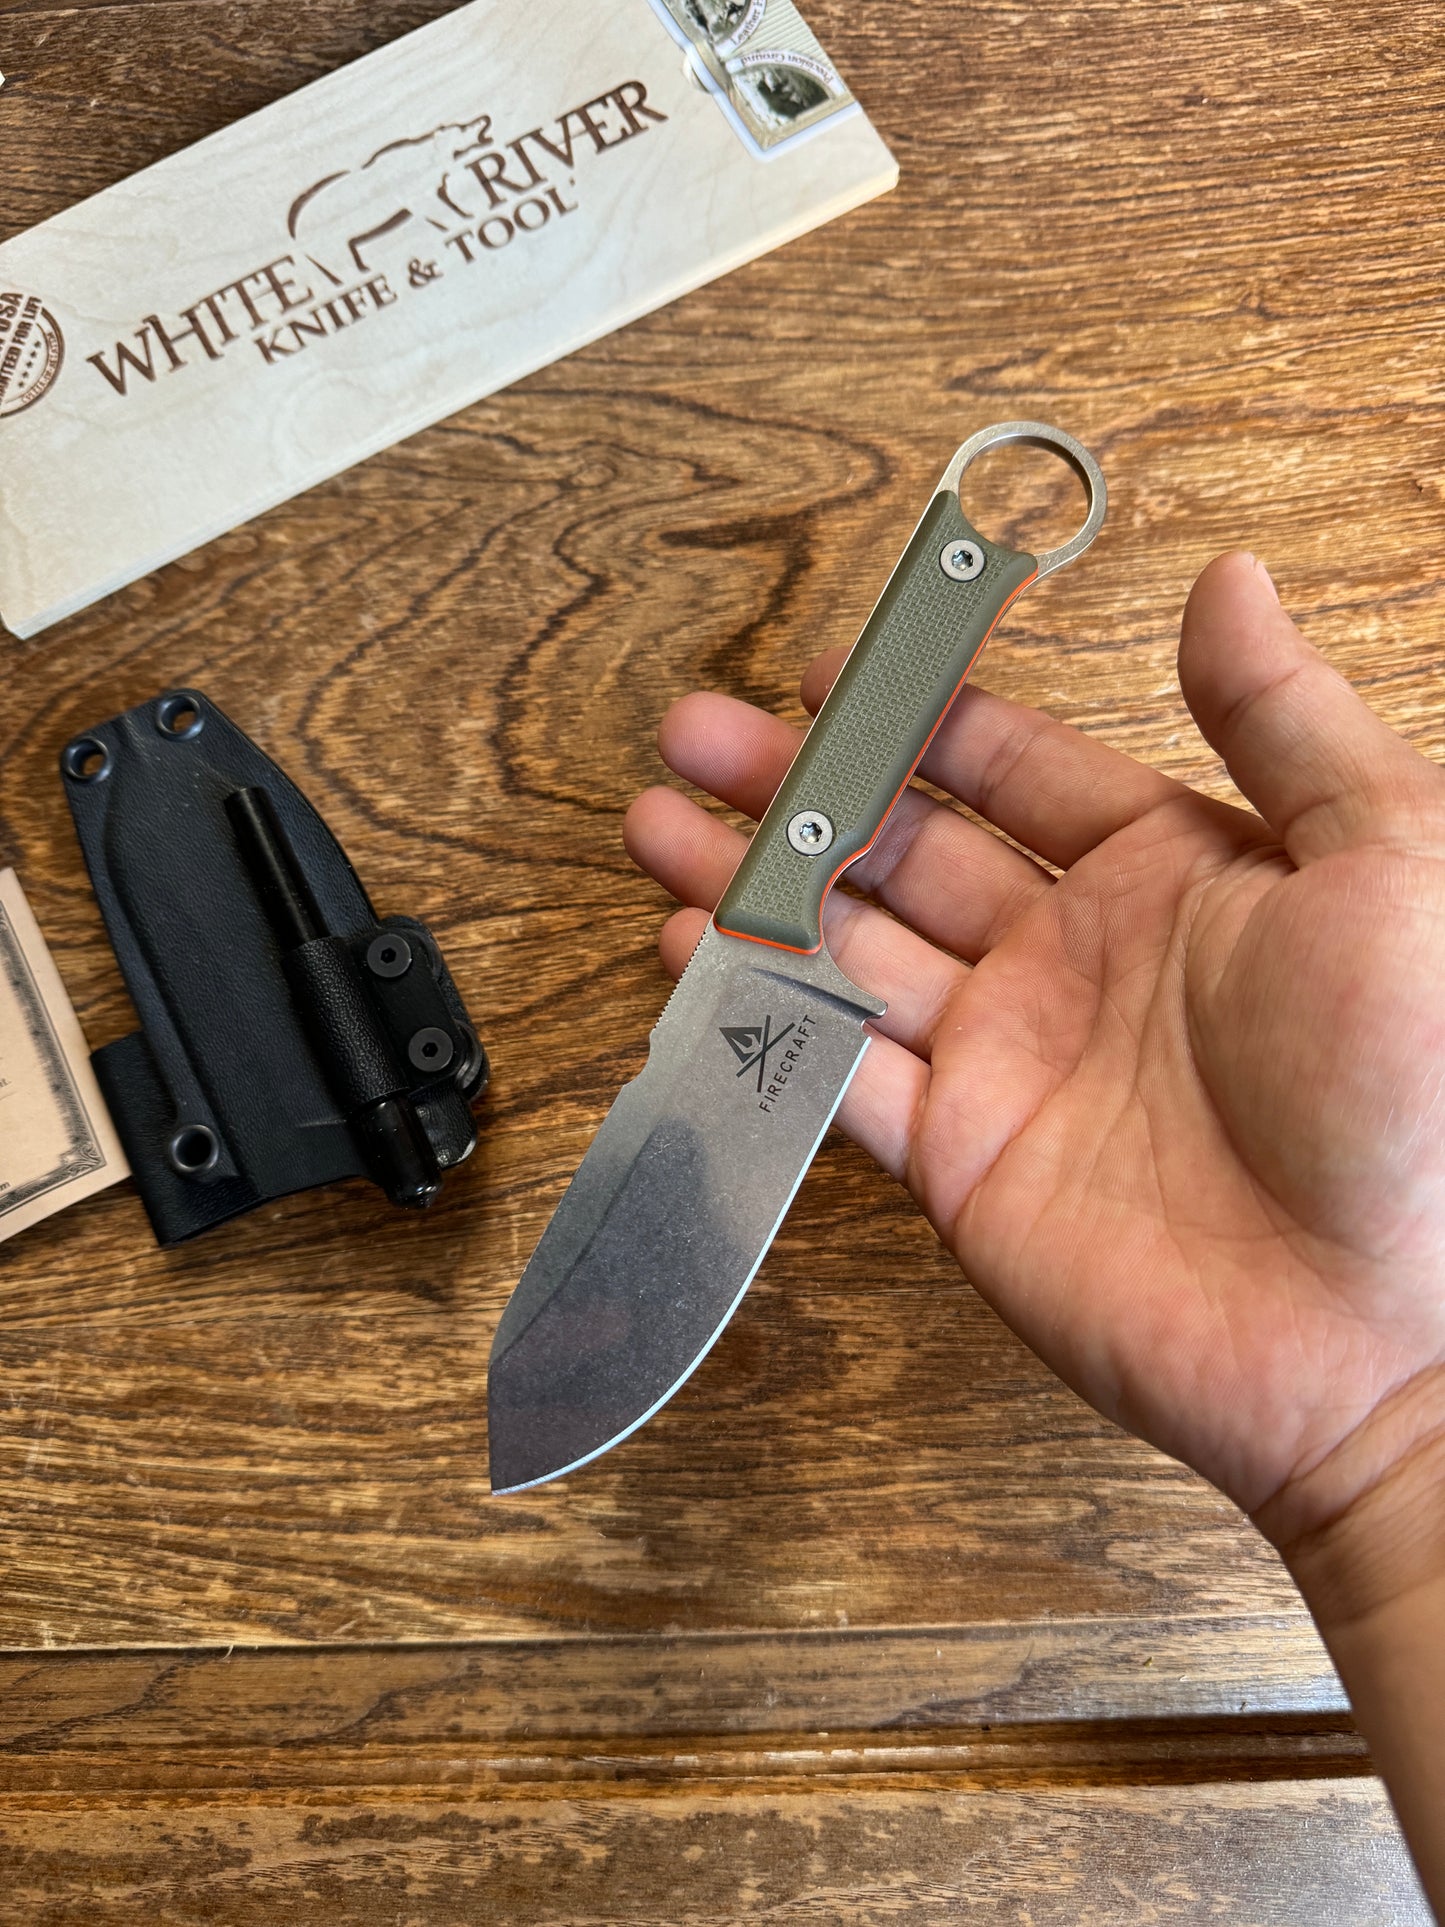 White River Knives Firecraft FC3.5 Pro Fixed Blade Knife 3.5" S35VN Stonewashed, Textured Green and Orange G10 Handles, Black Kydex Sheath - WRFC-3.5-PRO-TGO